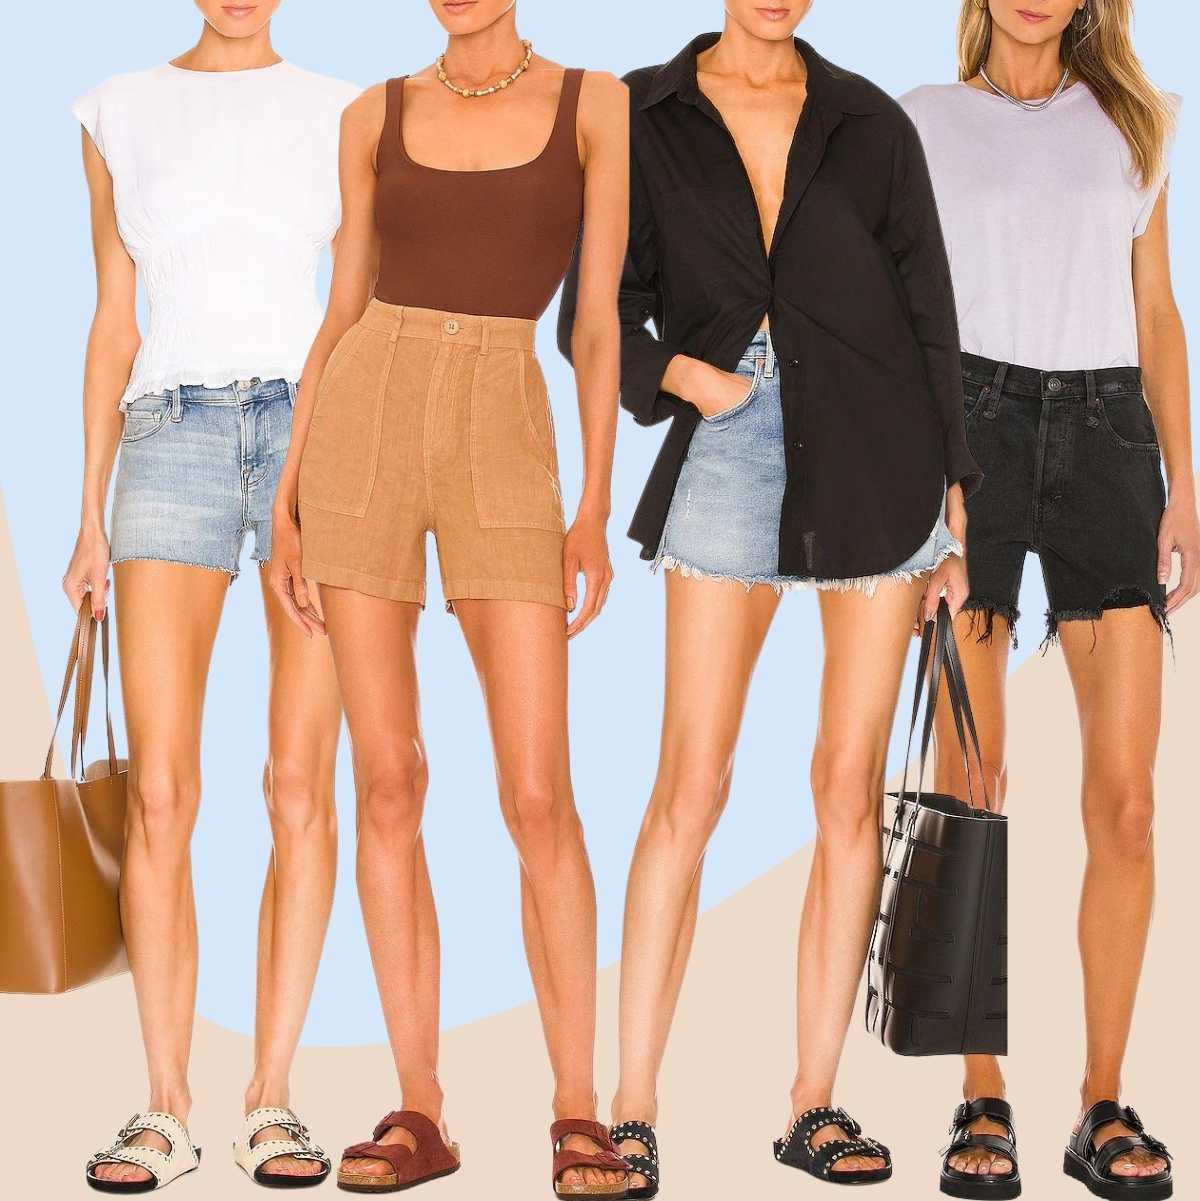 Collage of 5 women wearing different Birkenstock outfits with shorts.